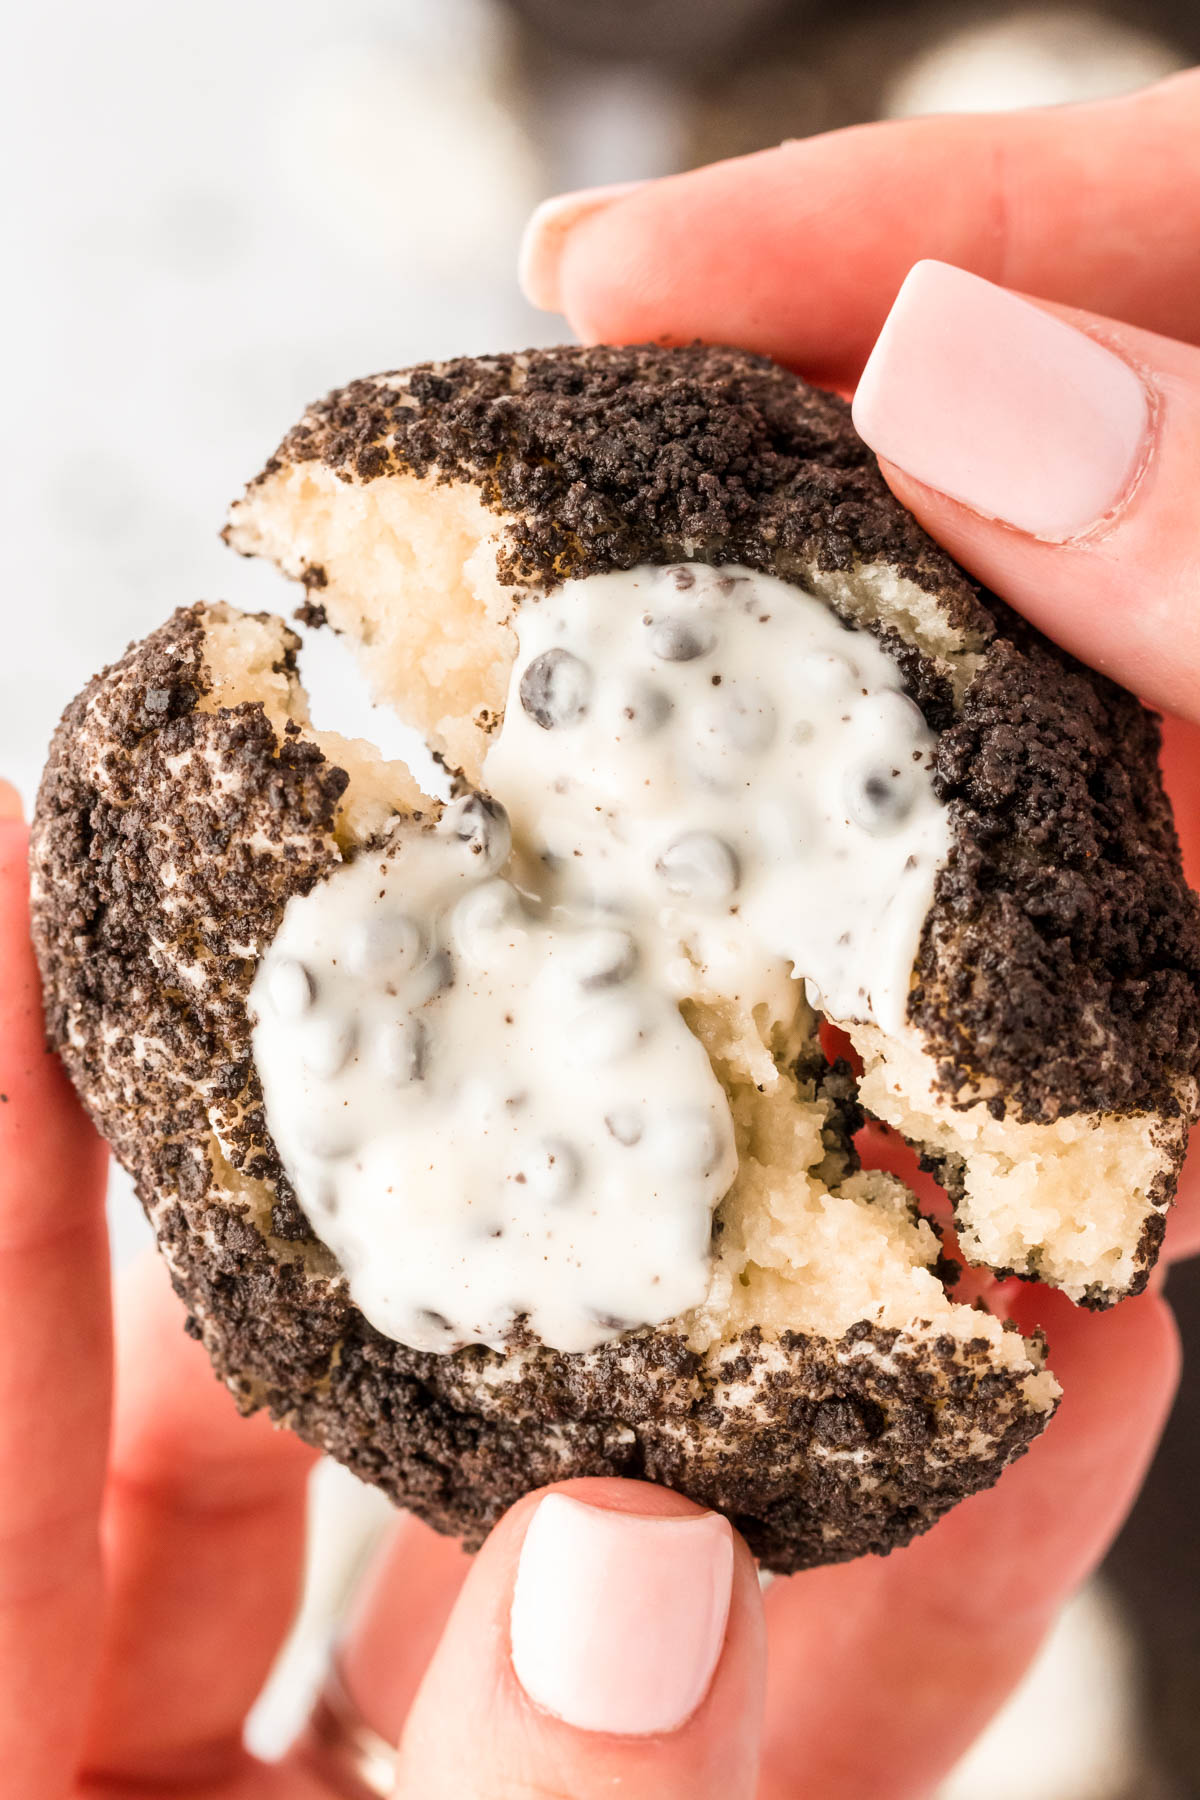 A woman's hand breaking an oreo thumbprint cookie in half.